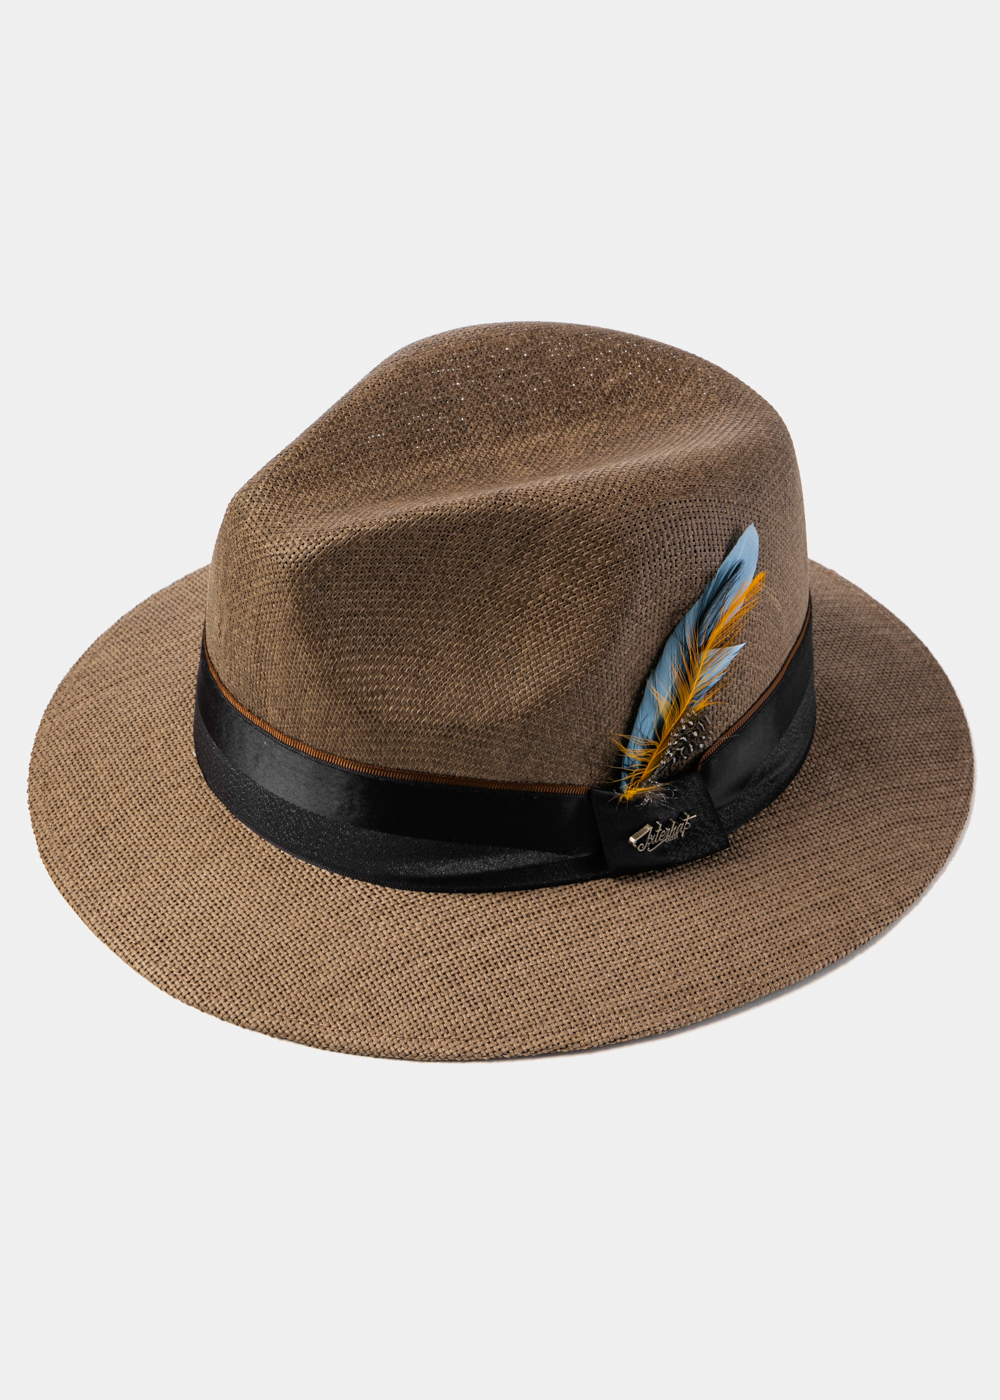 Brown Panama Style Hat w/ Black Ηatband & Feathers